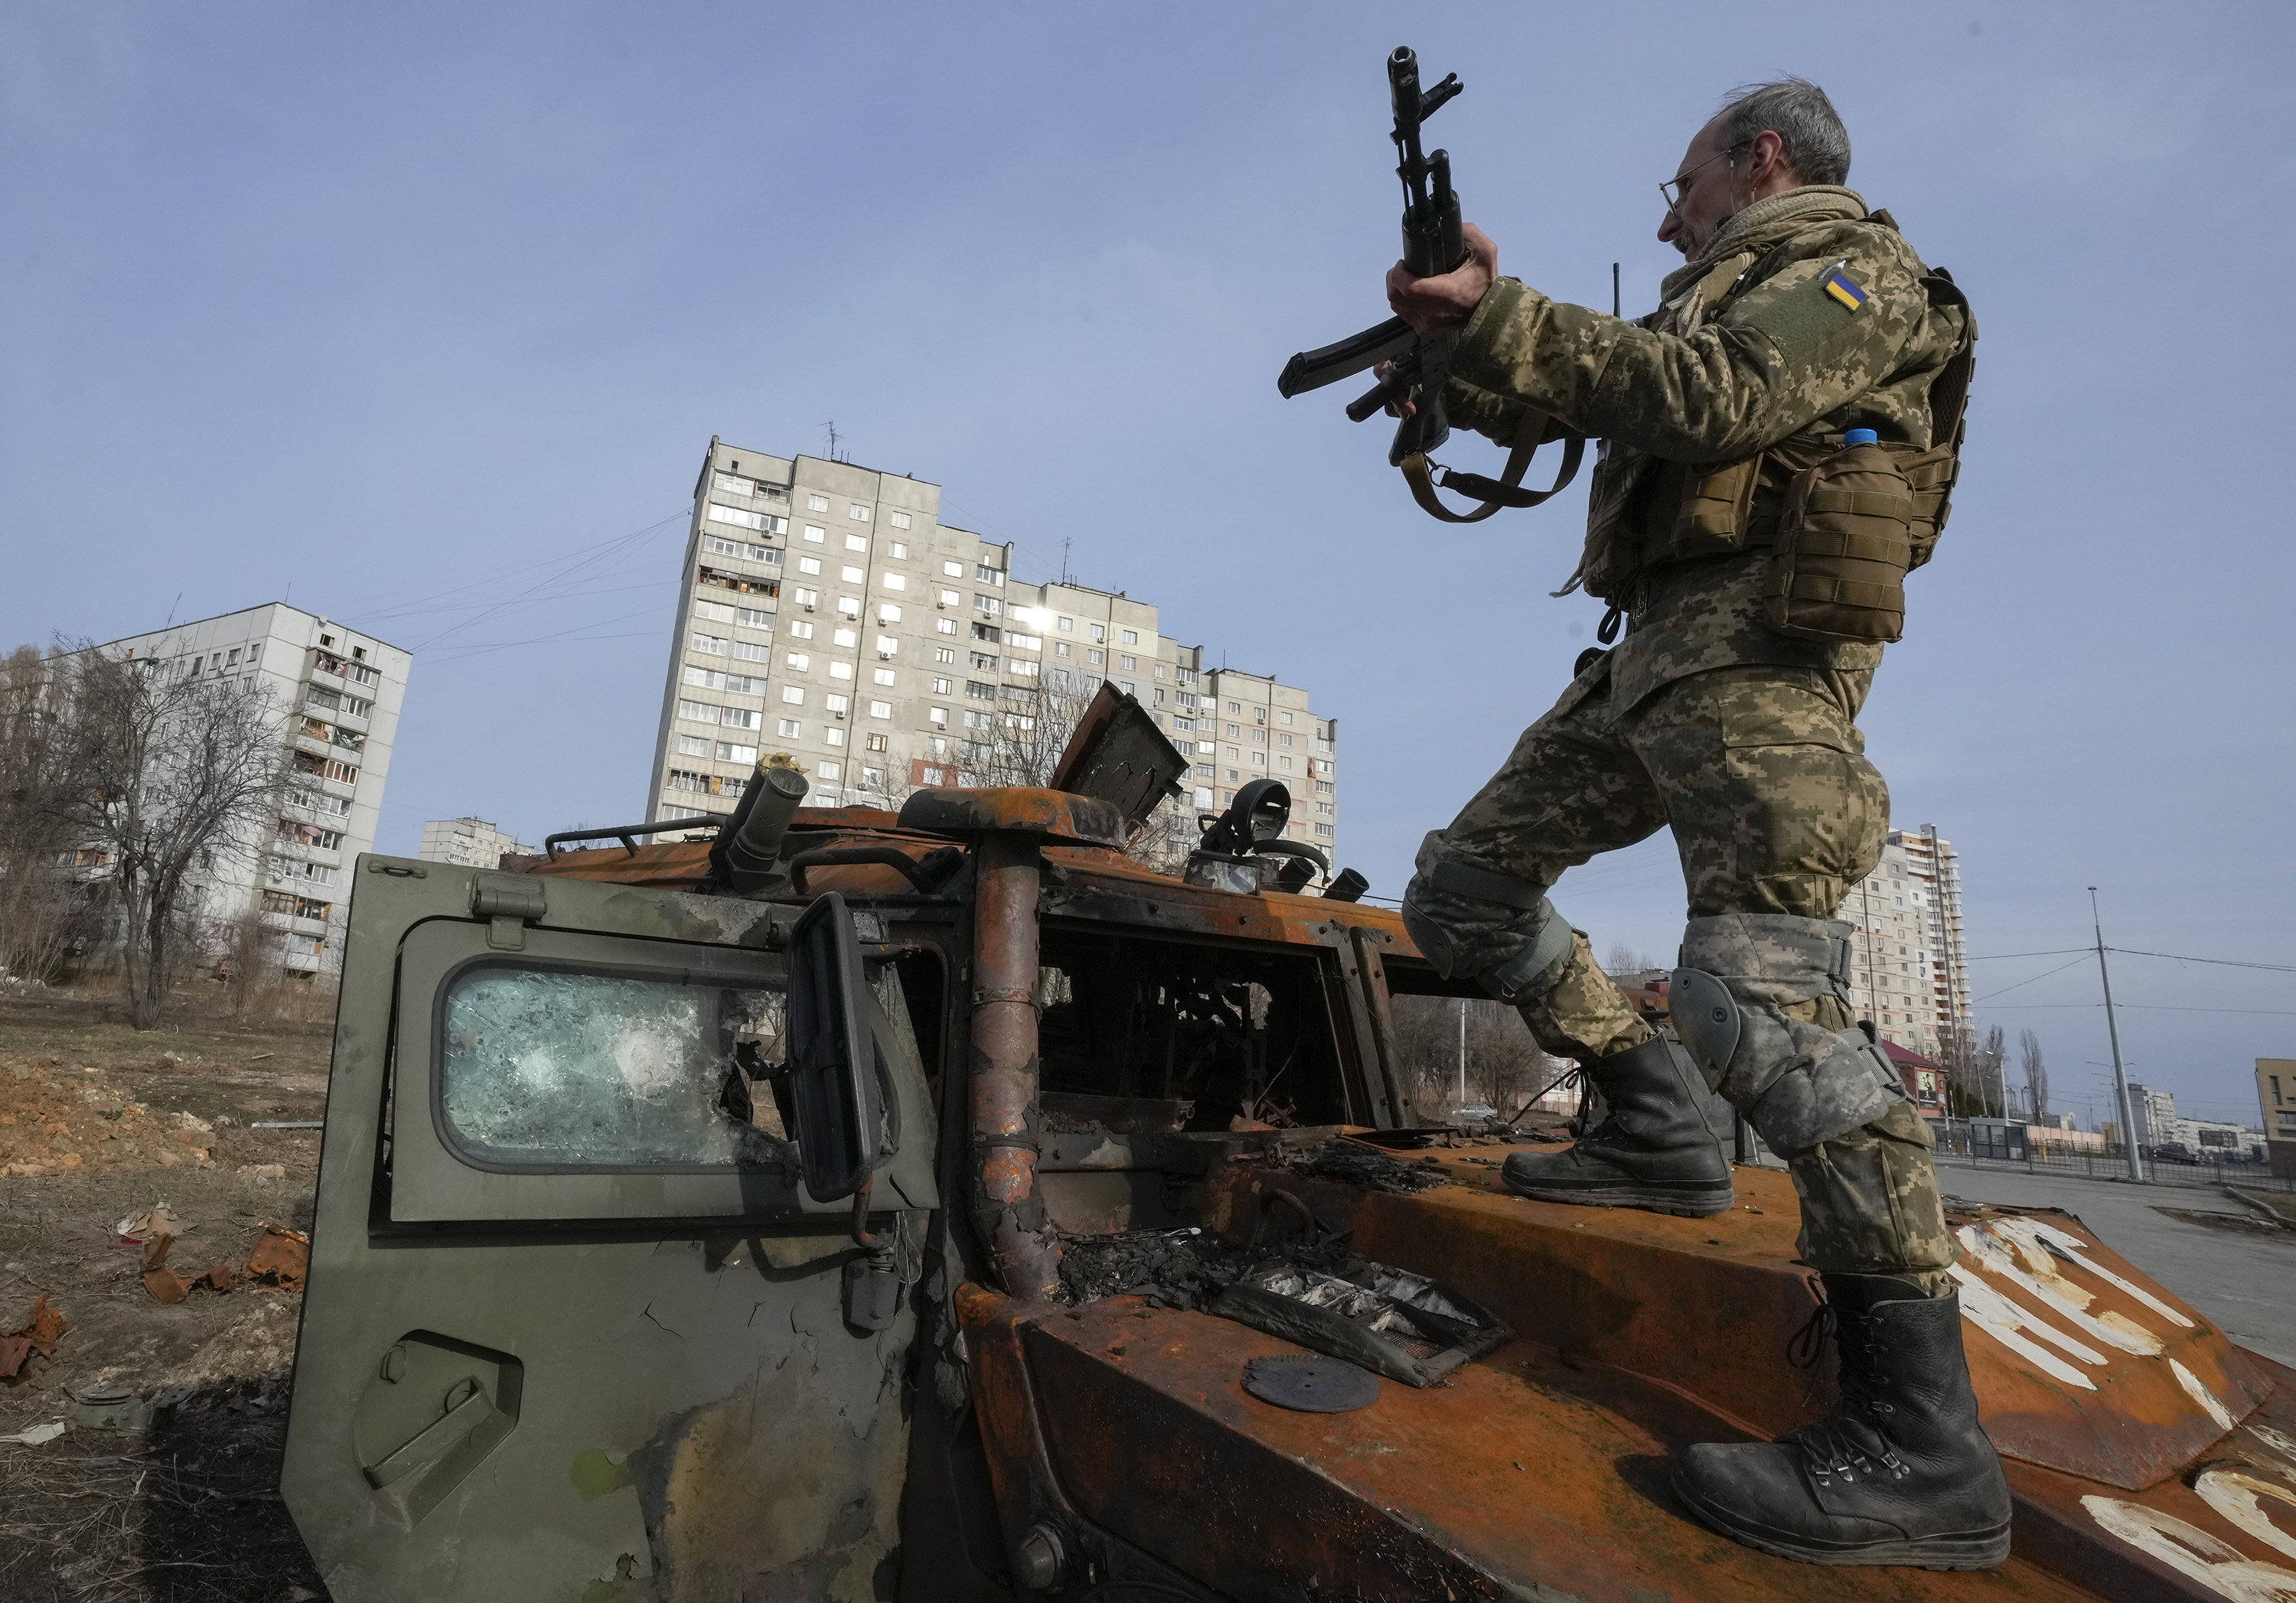 A Ukrainian soldier stands on top of a destroyed Russian armored personnel carrier after recent battle in Kharkiv, Ukraine, Saturday, March 26.